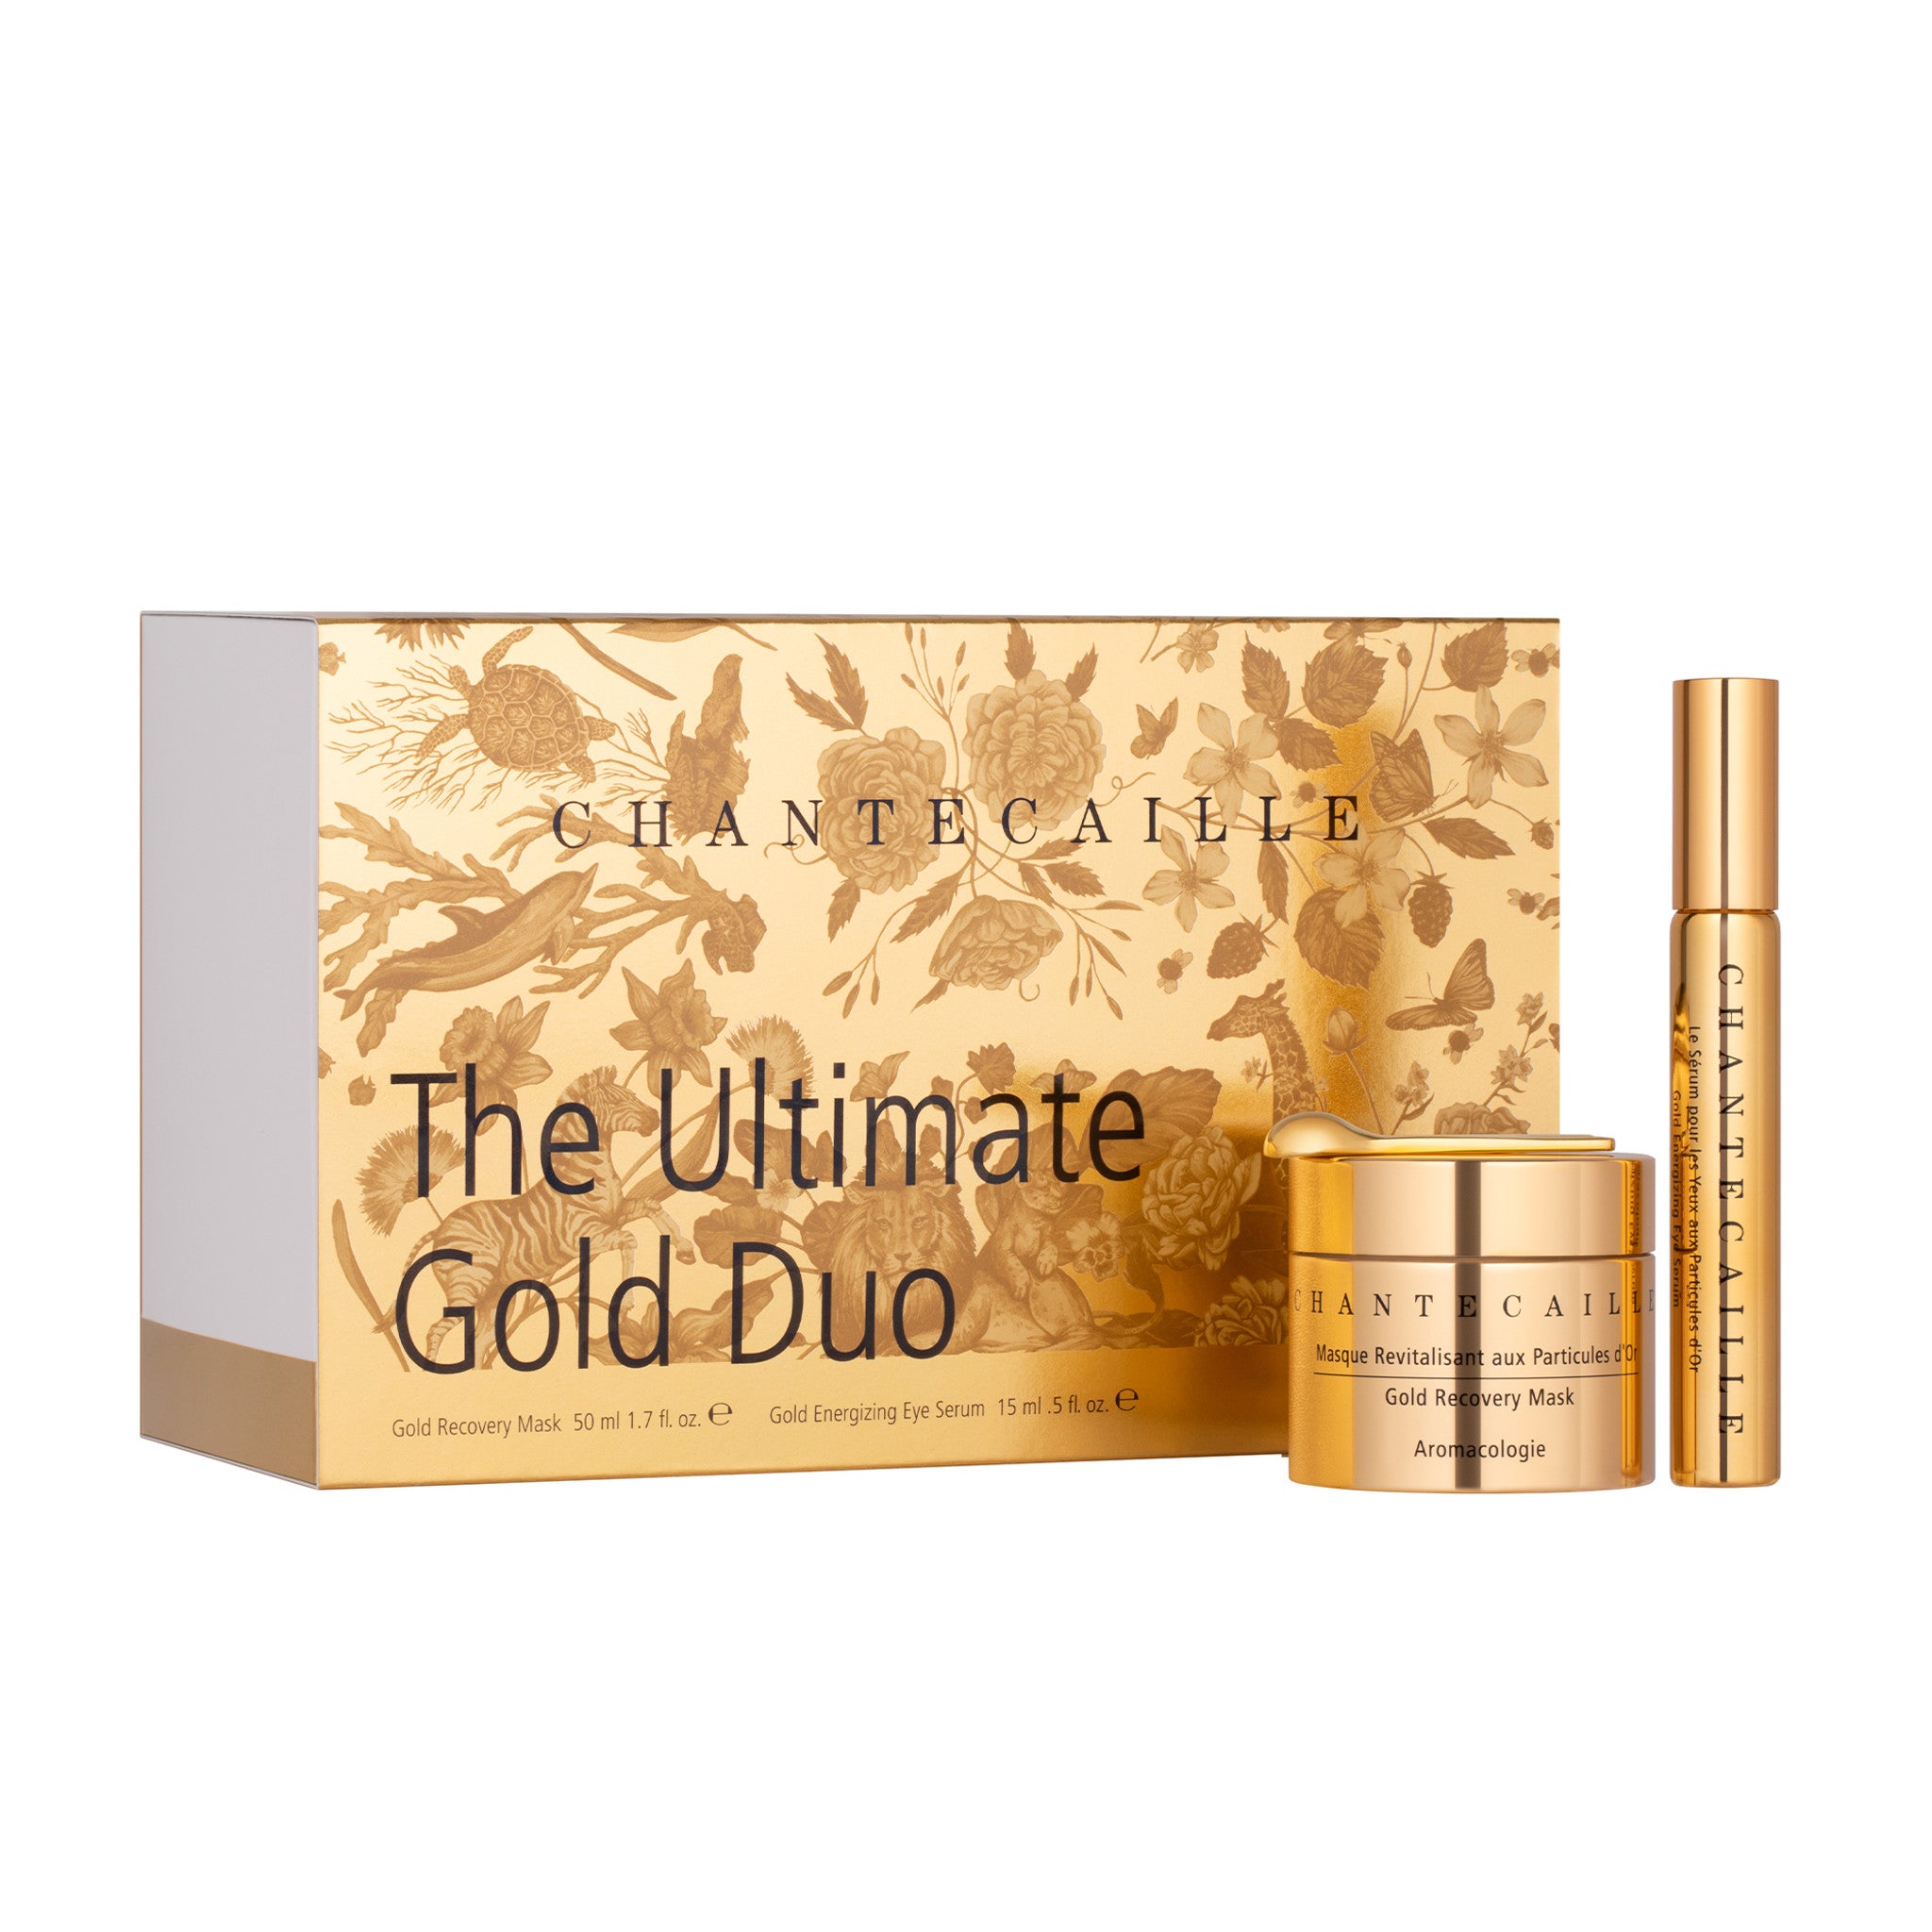 Chantecaille The Ultimate Gold Duo (Limited Edition) main image.